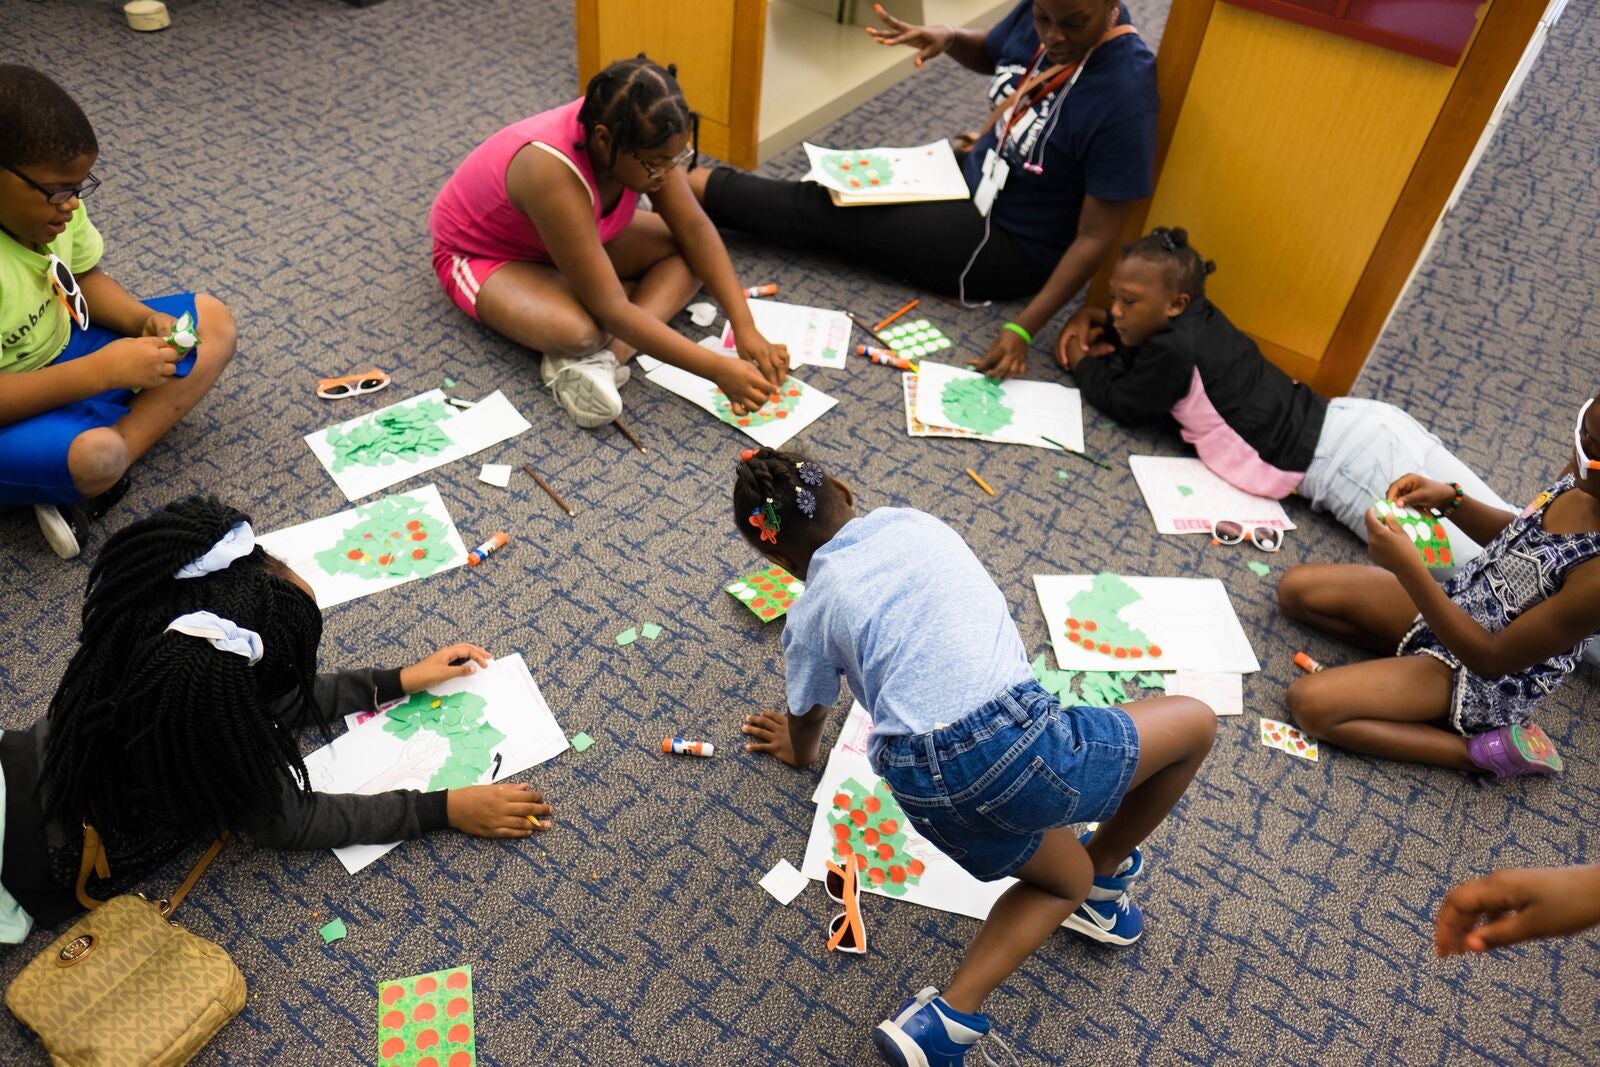 Children work on their drawings on the floor of a public library in Dallas.